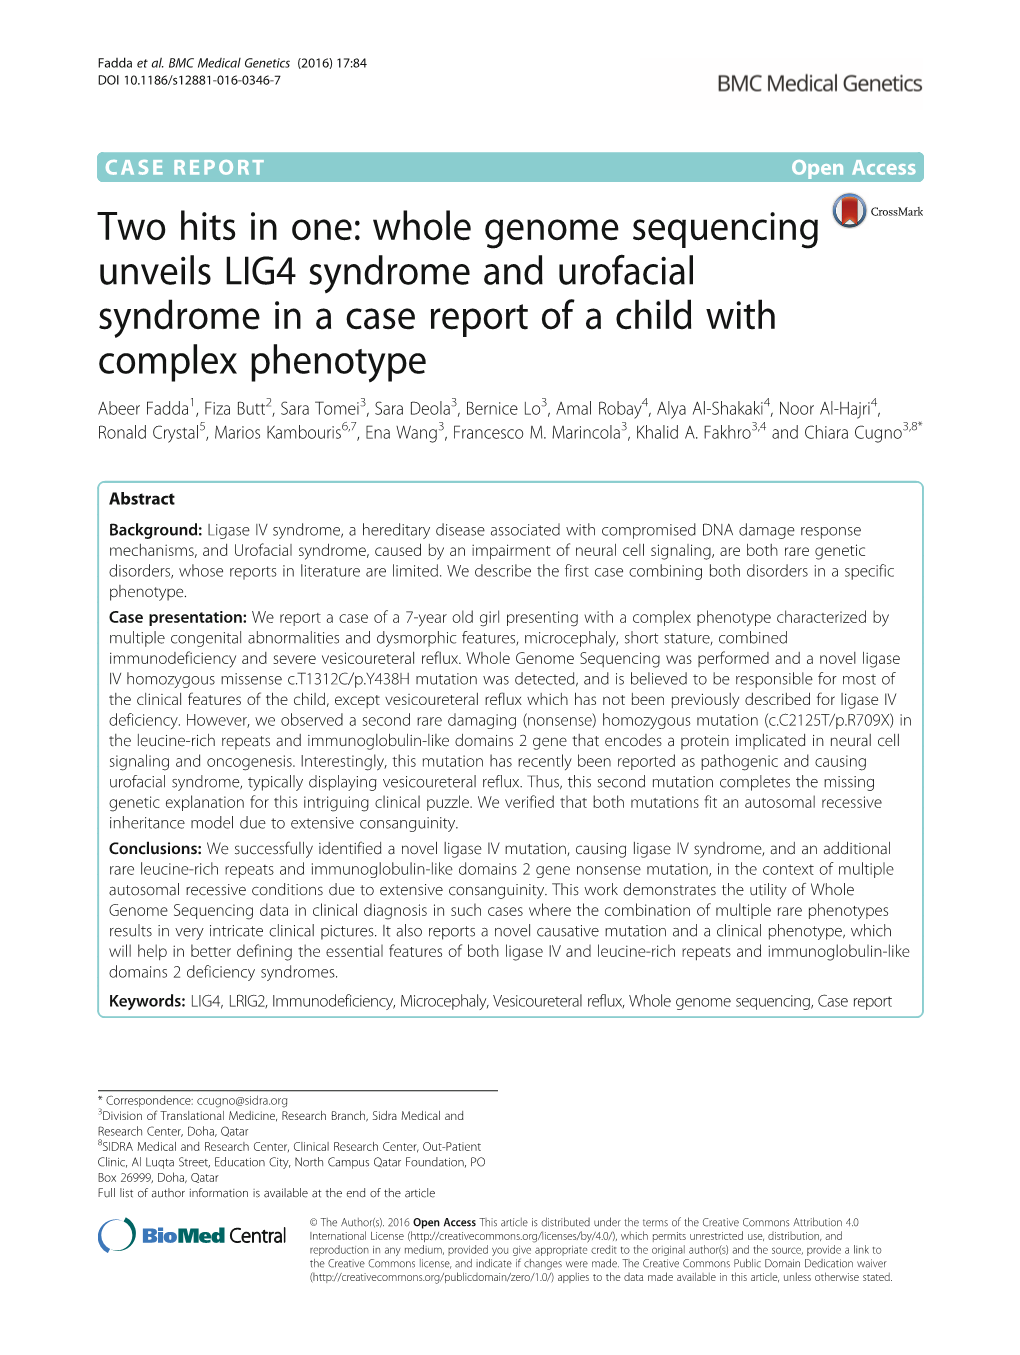 Two Hits in One: Whole Genome Sequencing Unveils LIG4 Syndrome